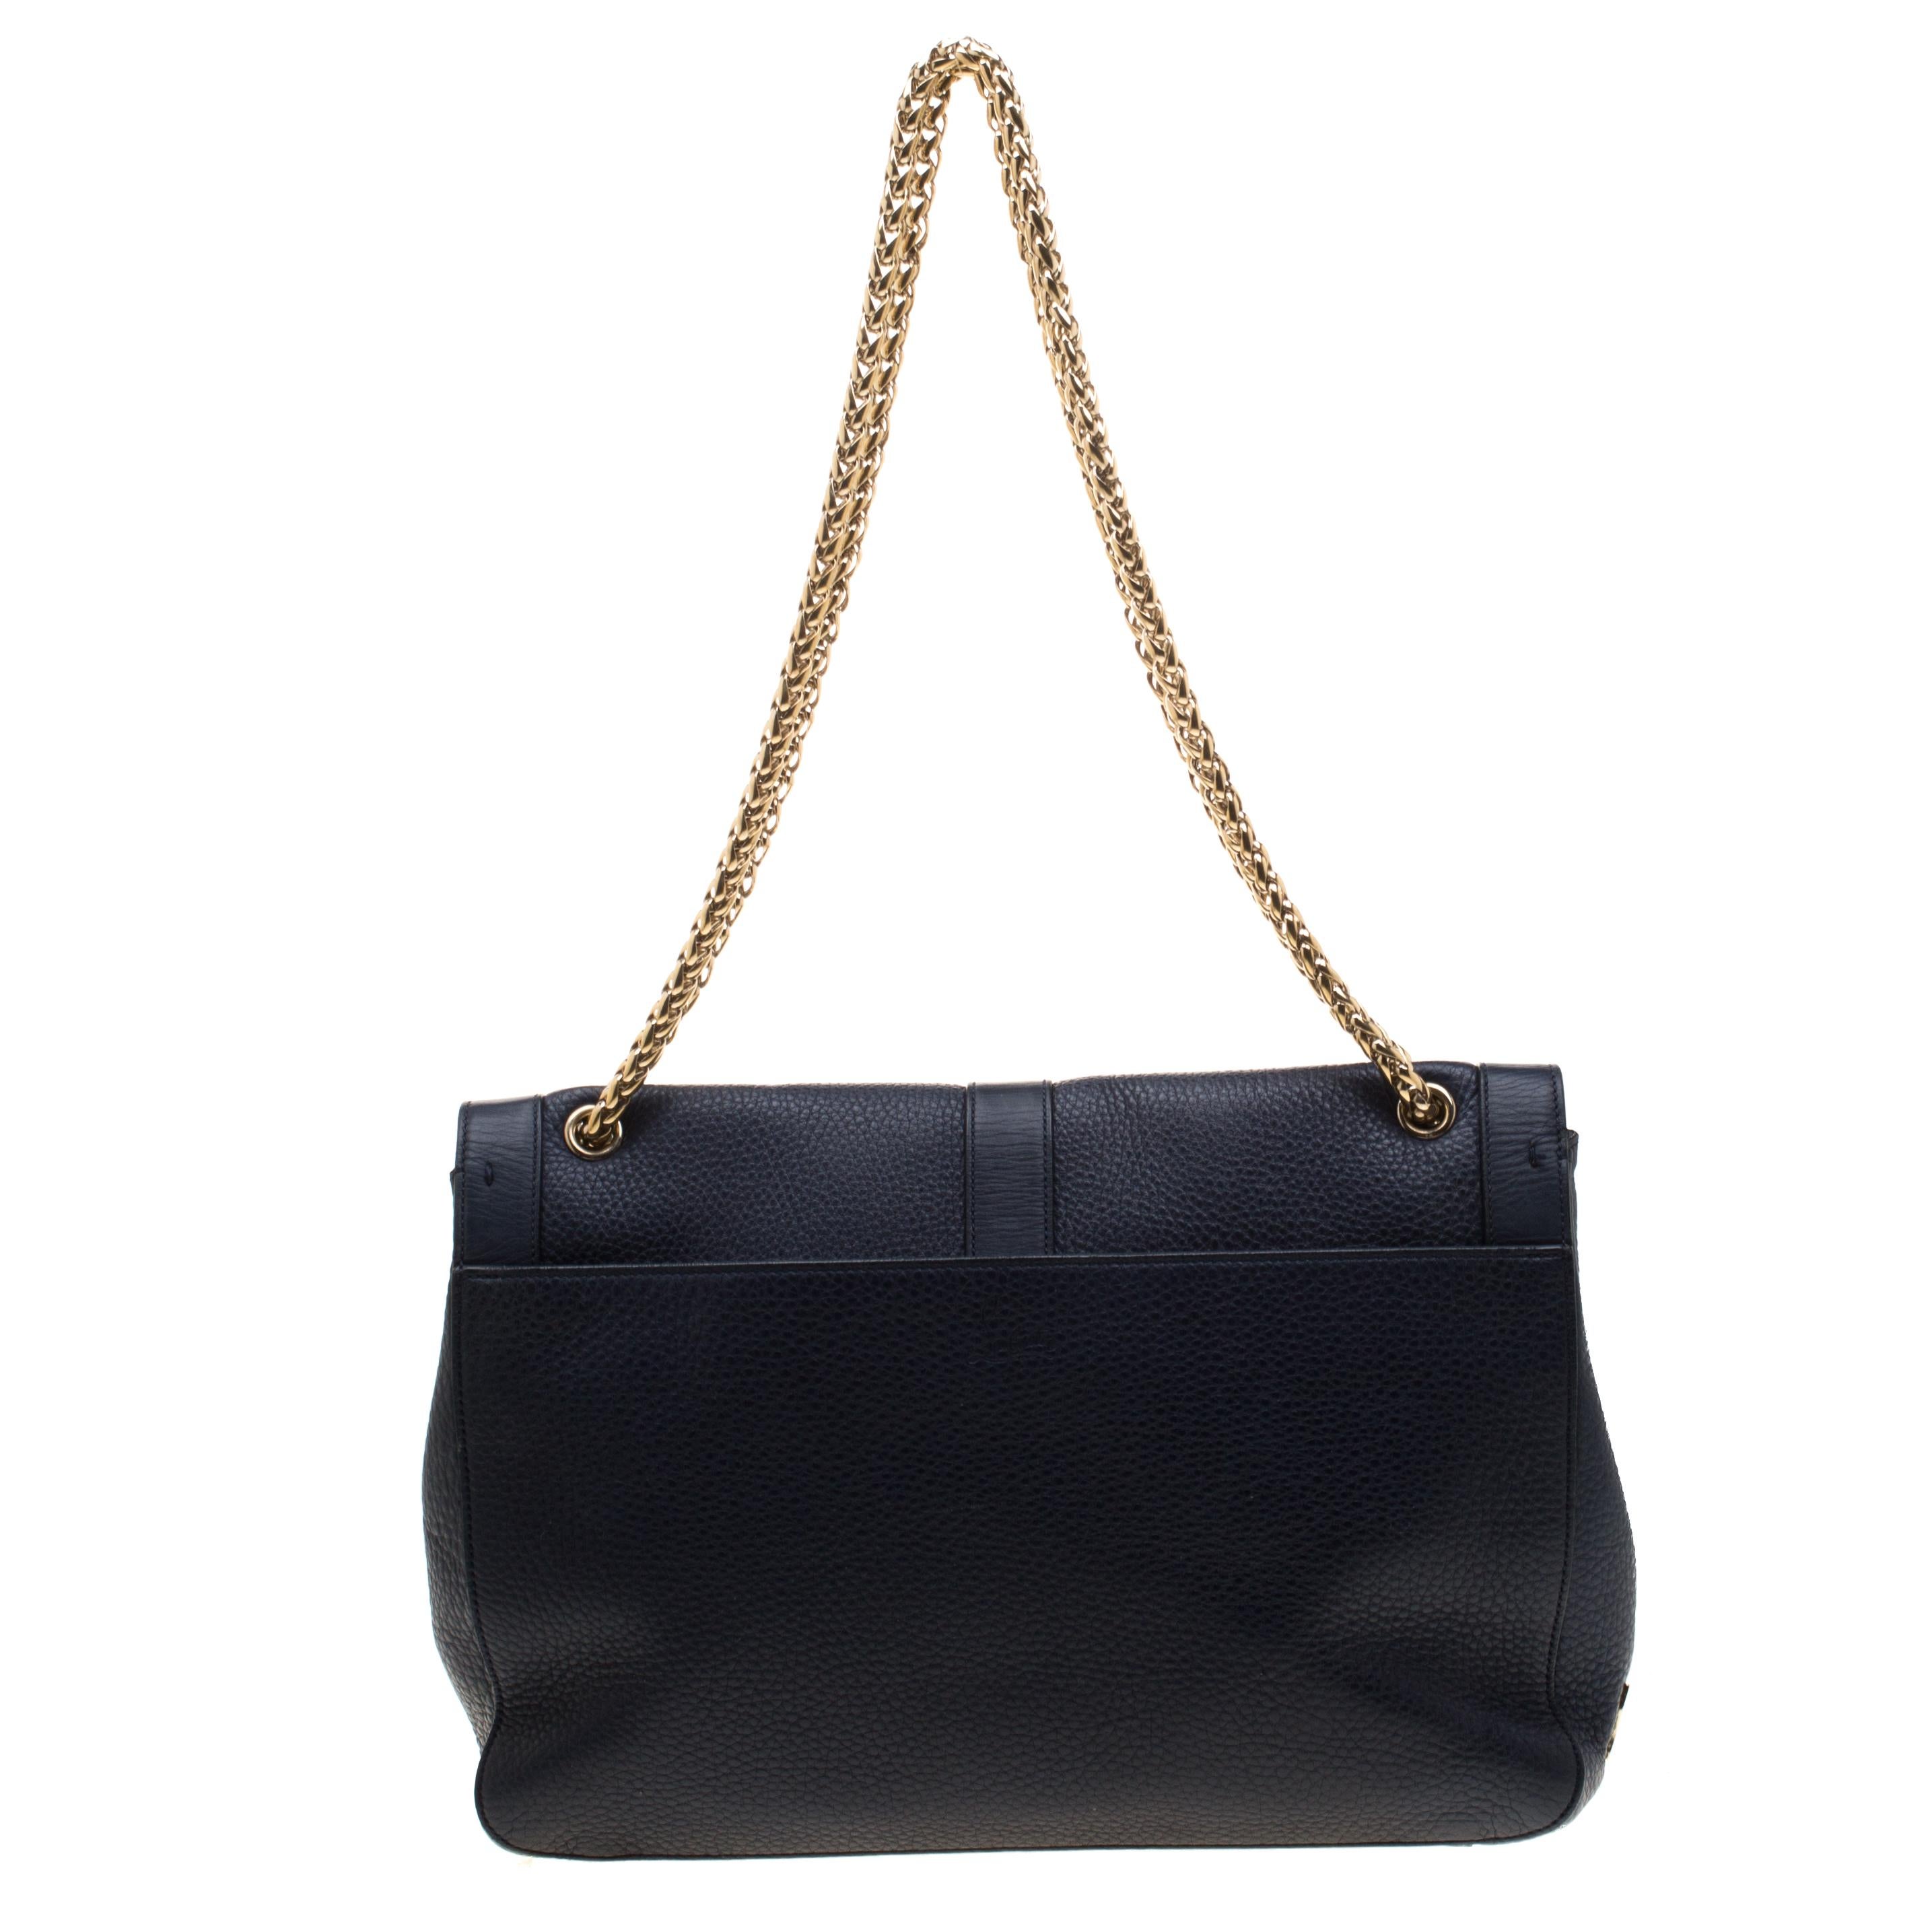 This modern Sweet Charity bag is a classic creation from Christian Louboutin. Crafted from blue leather, the bag comes with eye-catching stud embellishments and the signature Loubi bow detail on the front. The insides are fabric-lined and the bag is